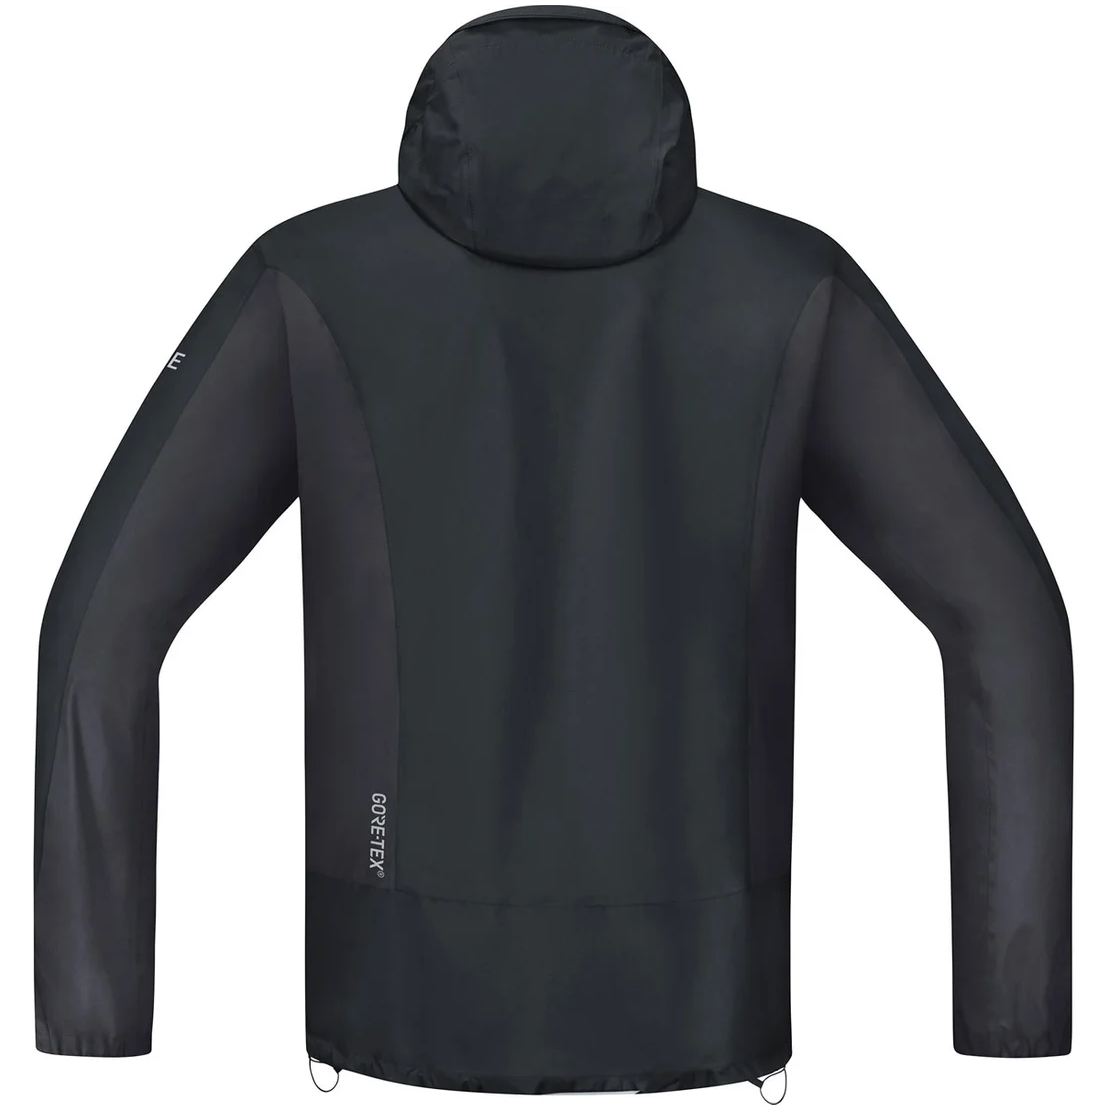 GORE WEAR - C5 GTX ACTIVE TRAIL, HOODED JACKET